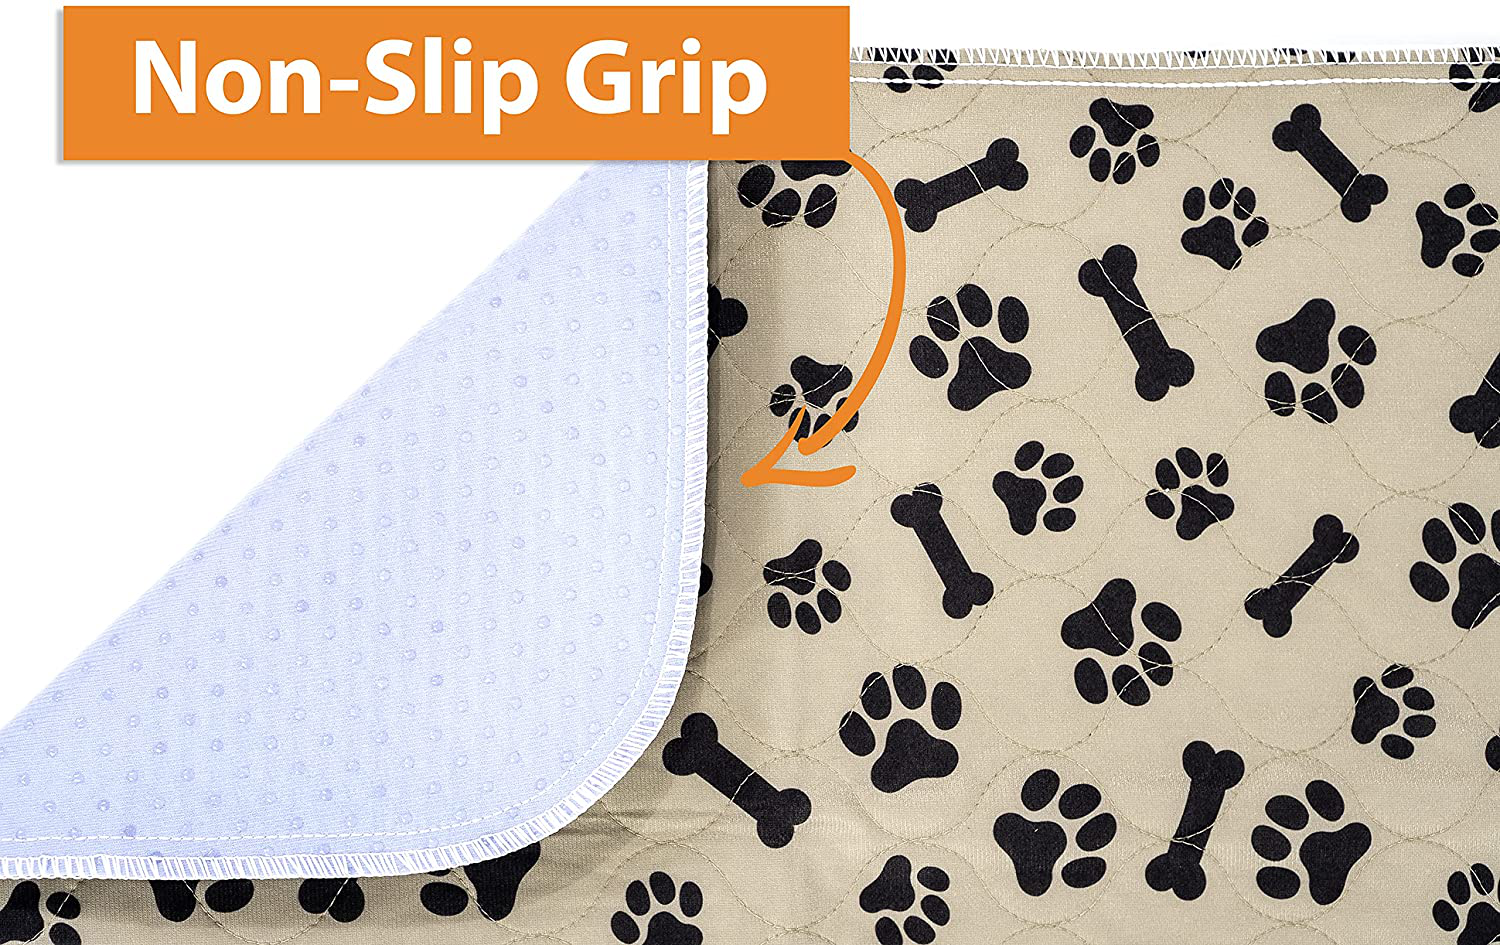 JUNGLE CREATIONS Washable Pee Pads for Dogs (3-Pack) 30" X 36" Reusable Waterproof Potty Training Mats for Puppy Playpen, Whelping Box, Crate Liner for Small, Medium, Large, and XL Pets Animals & Pet Supplies > Pet Supplies > Dog Supplies > Dog Diaper Pads & Liners Jungle Creations   